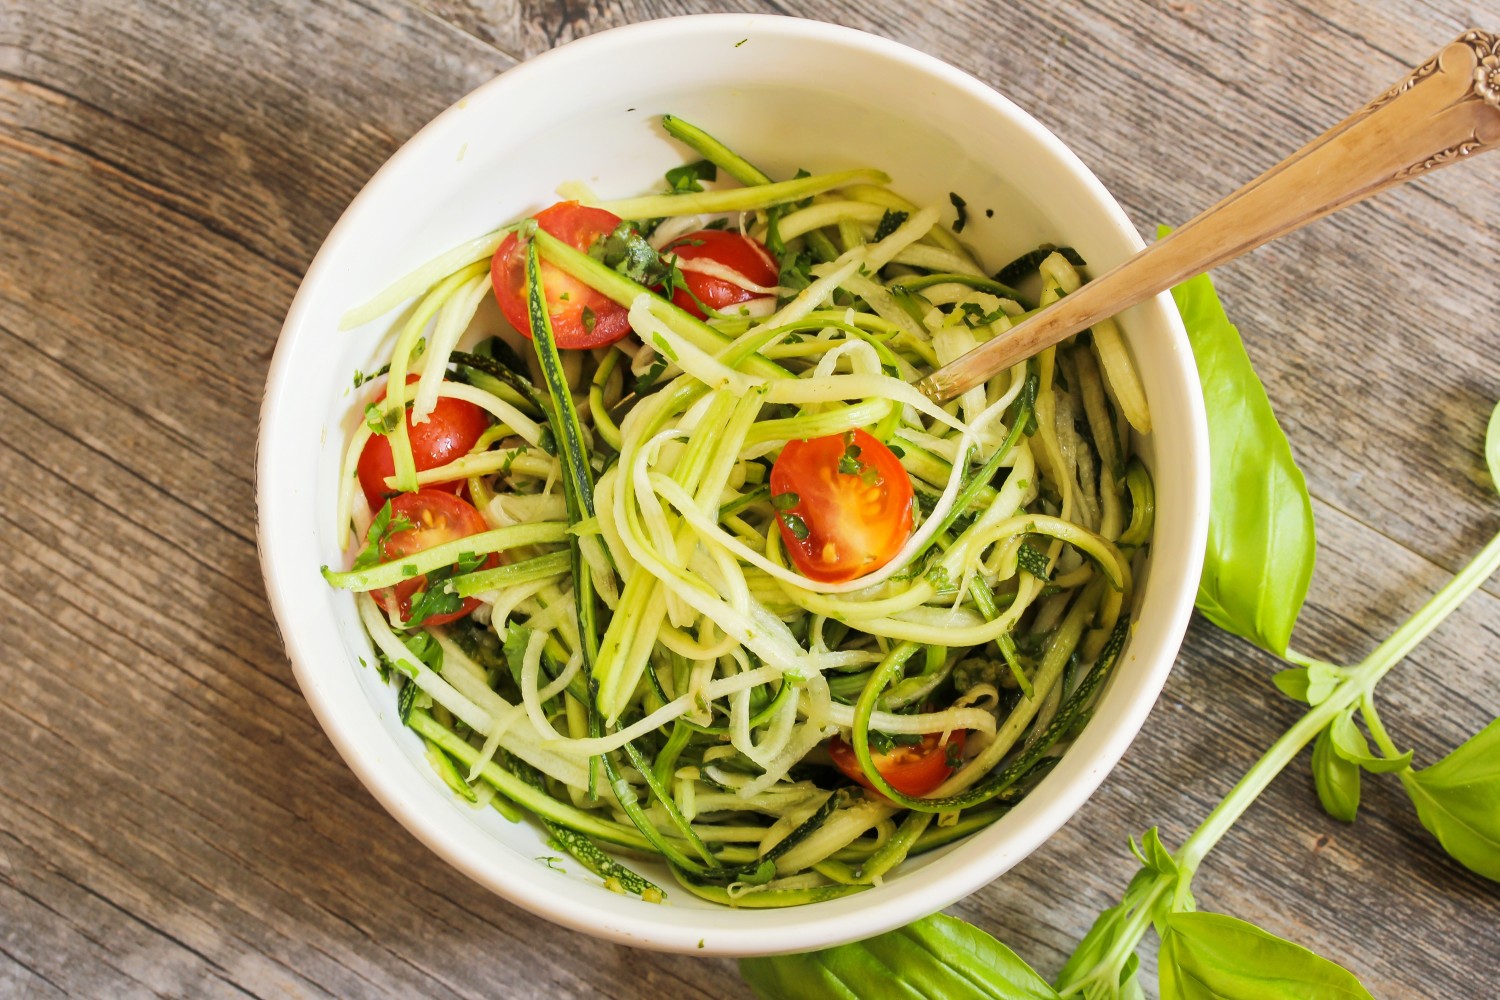 Say “Yum” Or “Yuck” to These Trendy Foods to Find Out What People Hate Most About You zoodles